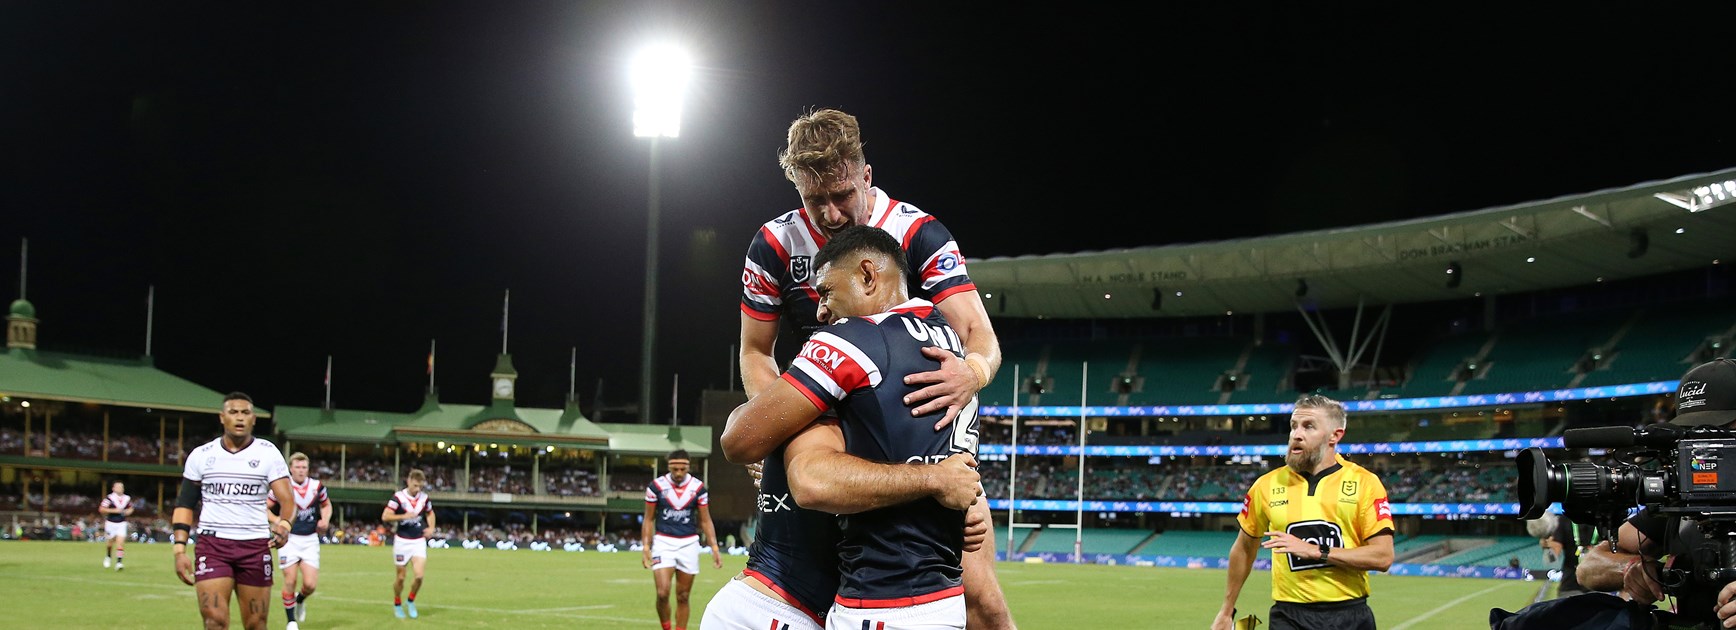 Roosters Light Up SCG With Striking Performance